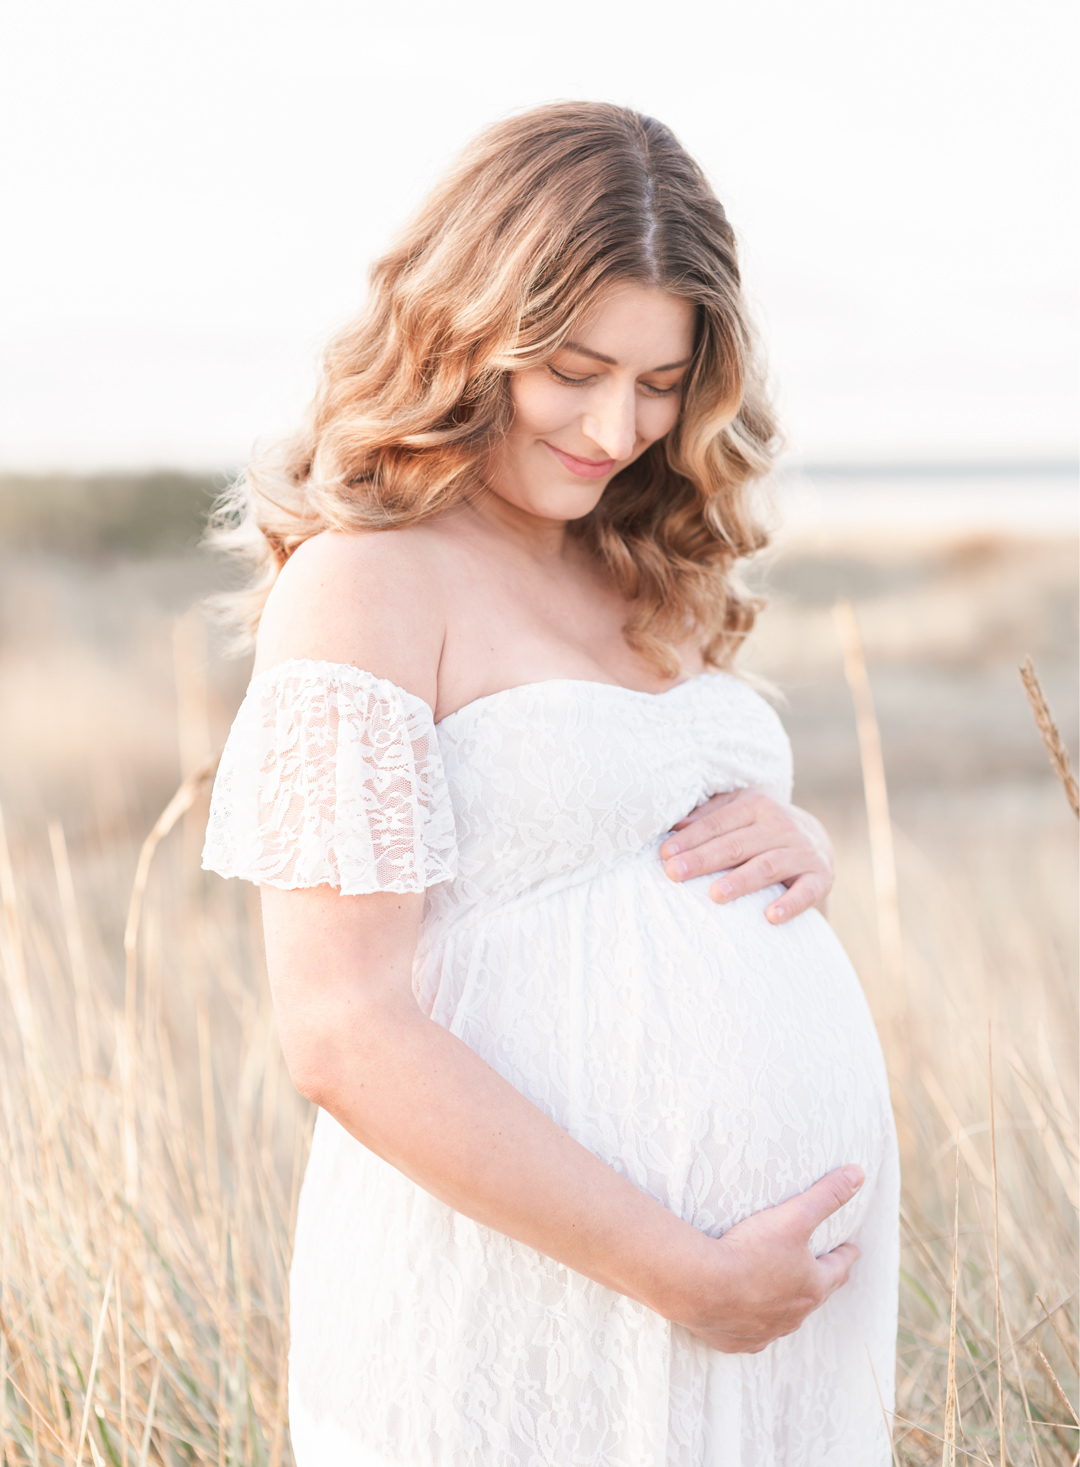 Maternity photos in a field